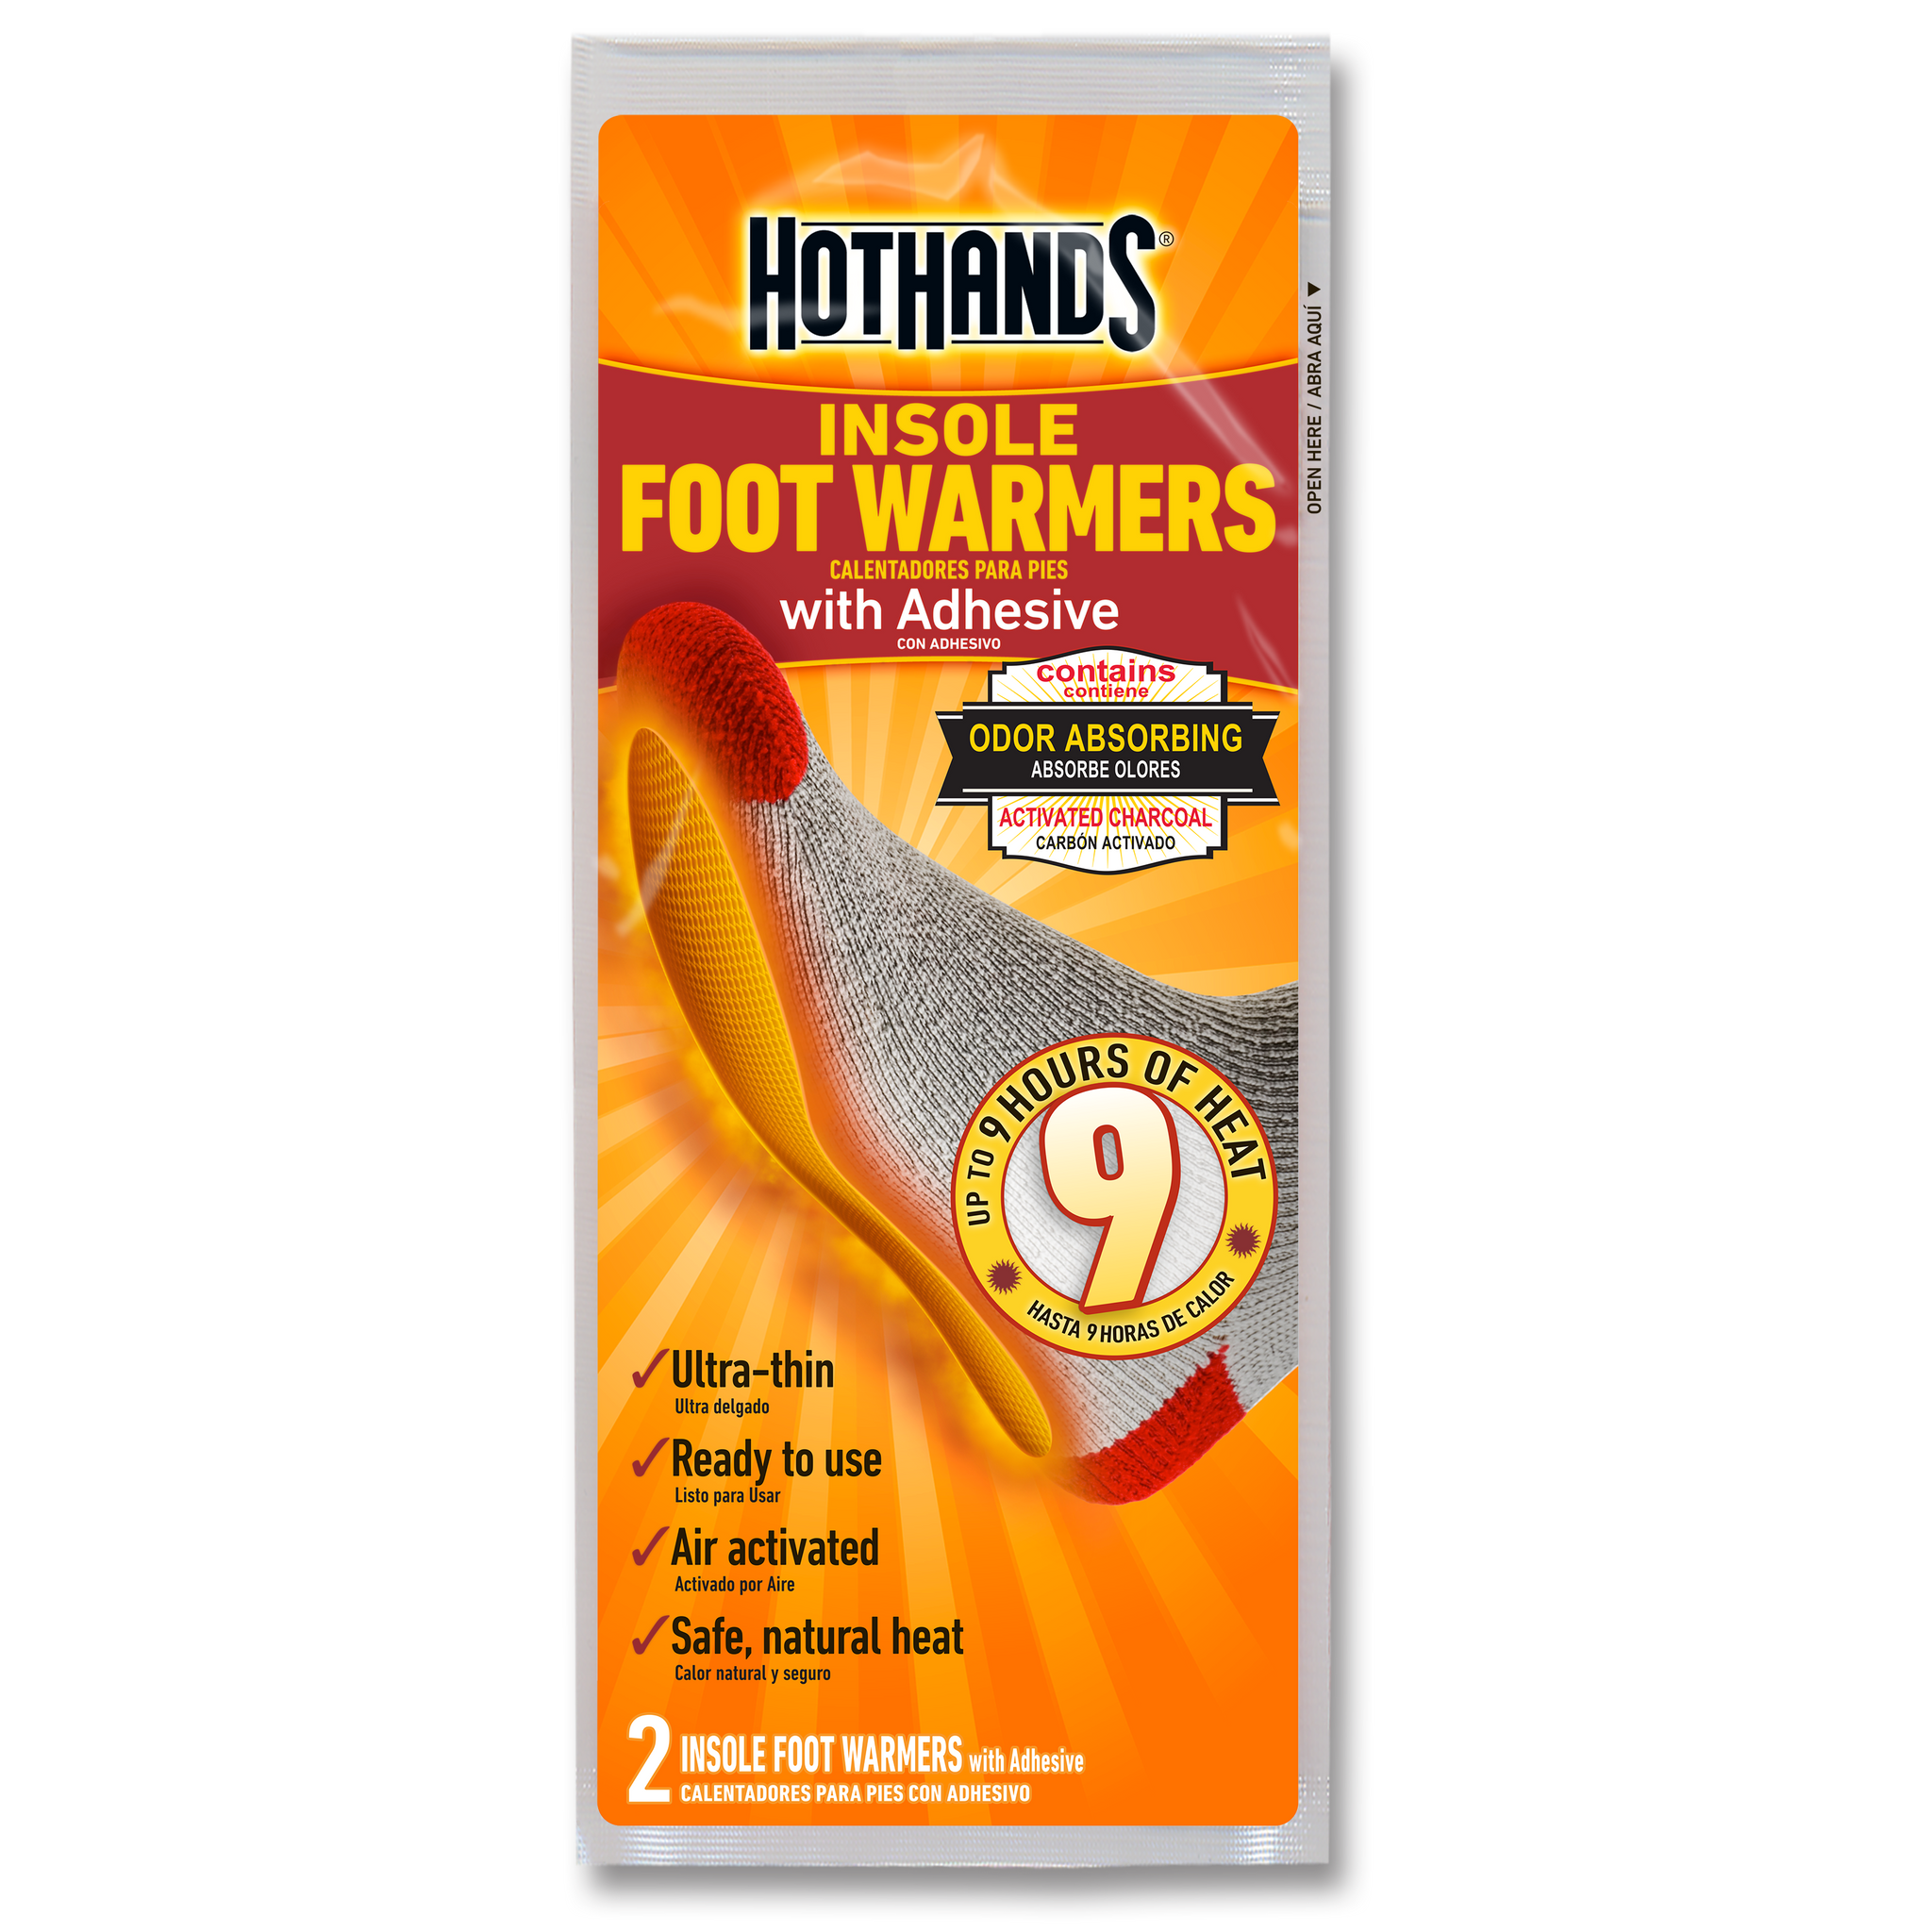 HotHands Insole Foot Warmers with Adhesive | HotHands Direct - hot hands foot warmers, hot hands shoe insoles, hot hands instant insole foot warmers